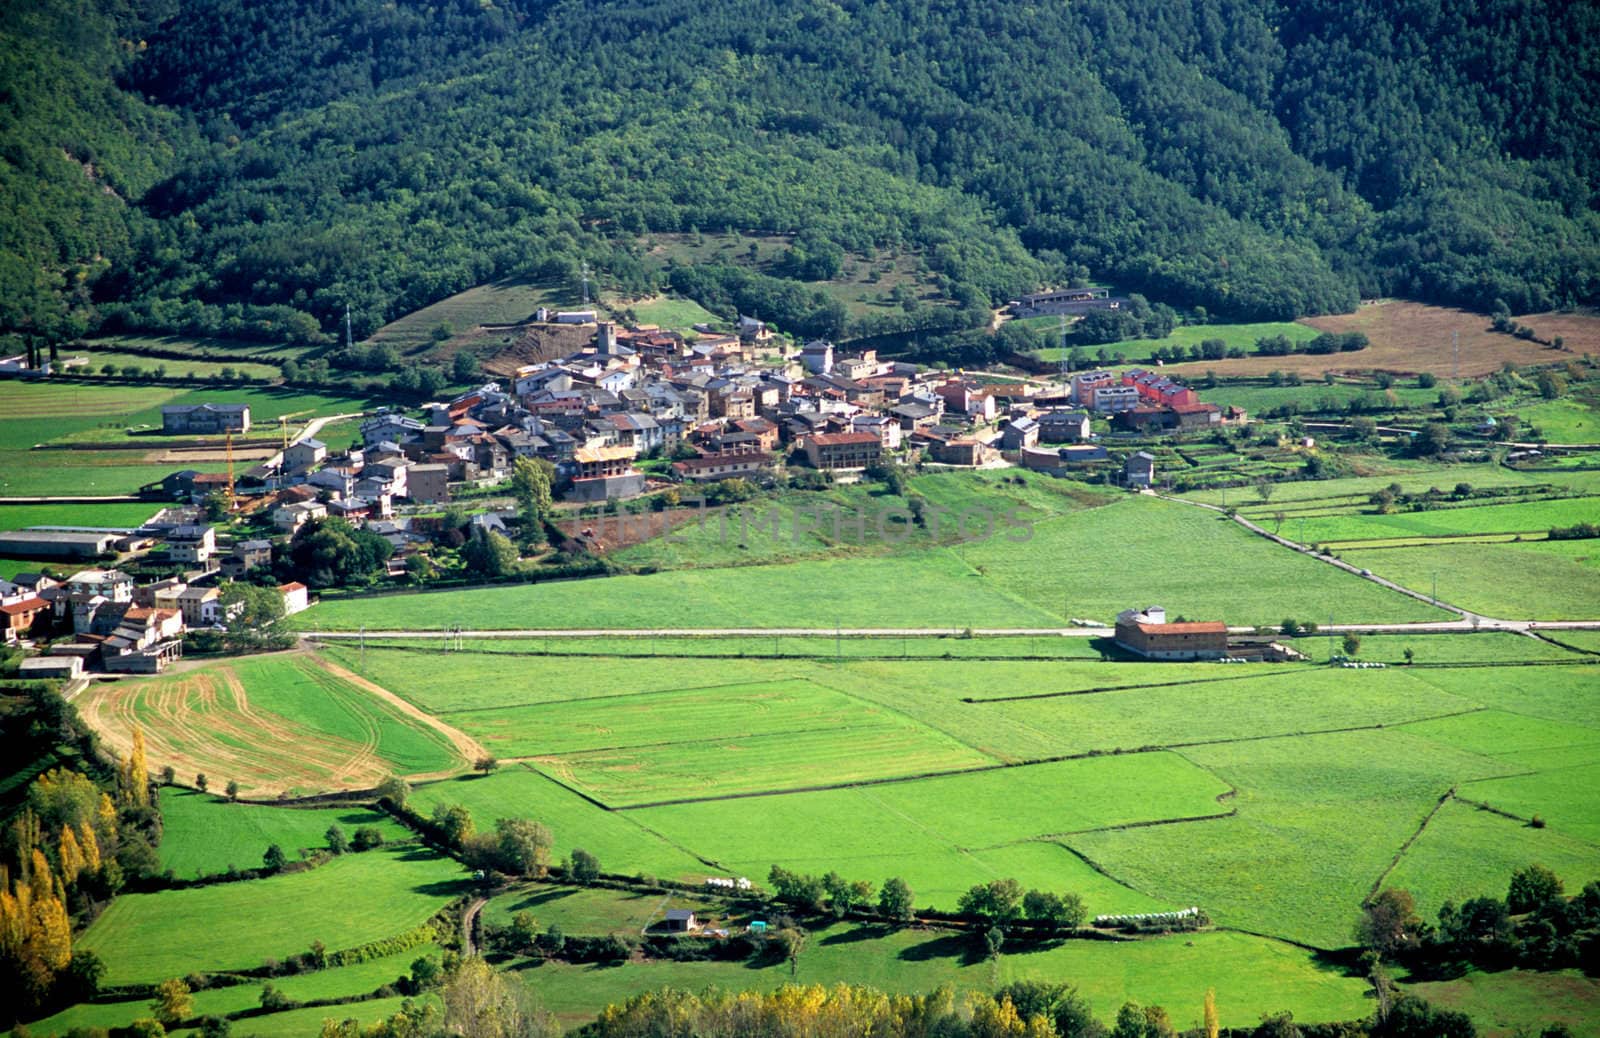 Villages and farms sit in a valley in the Pyrenees mountain range in Spain.